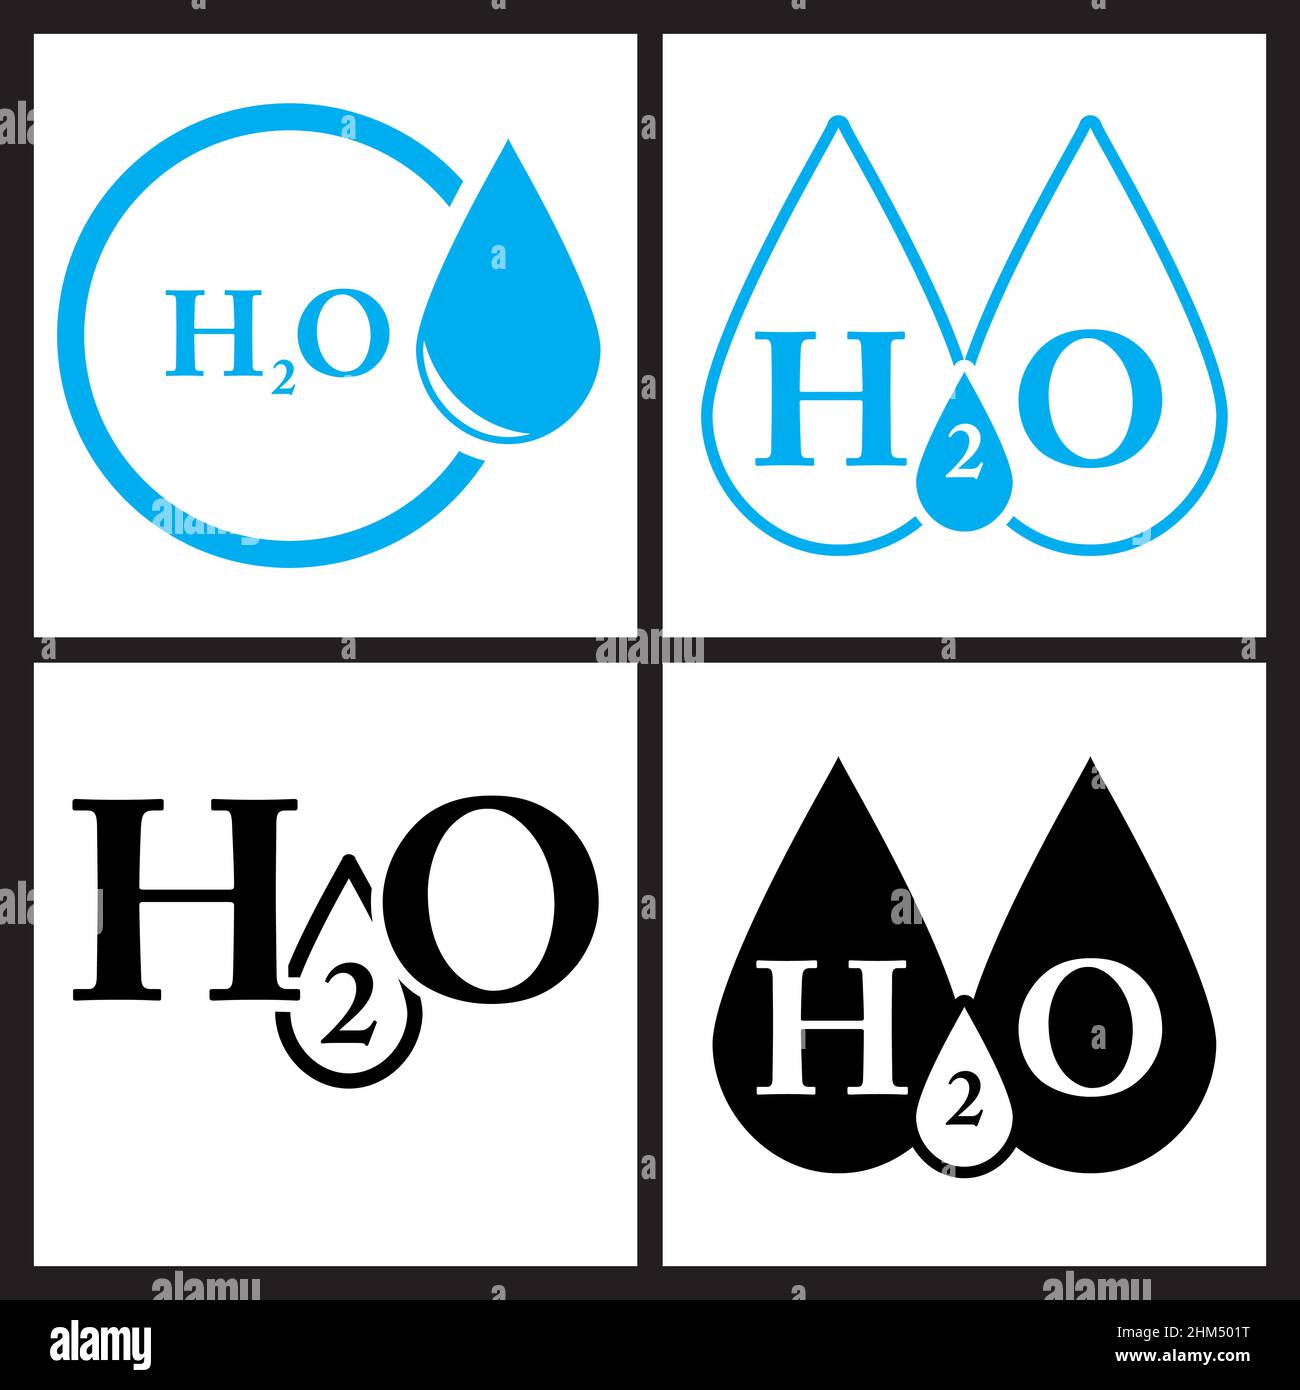 H2o icon collection. H2o water symbol design. Simple Vector illustration set isolated on white background. Stock Vector